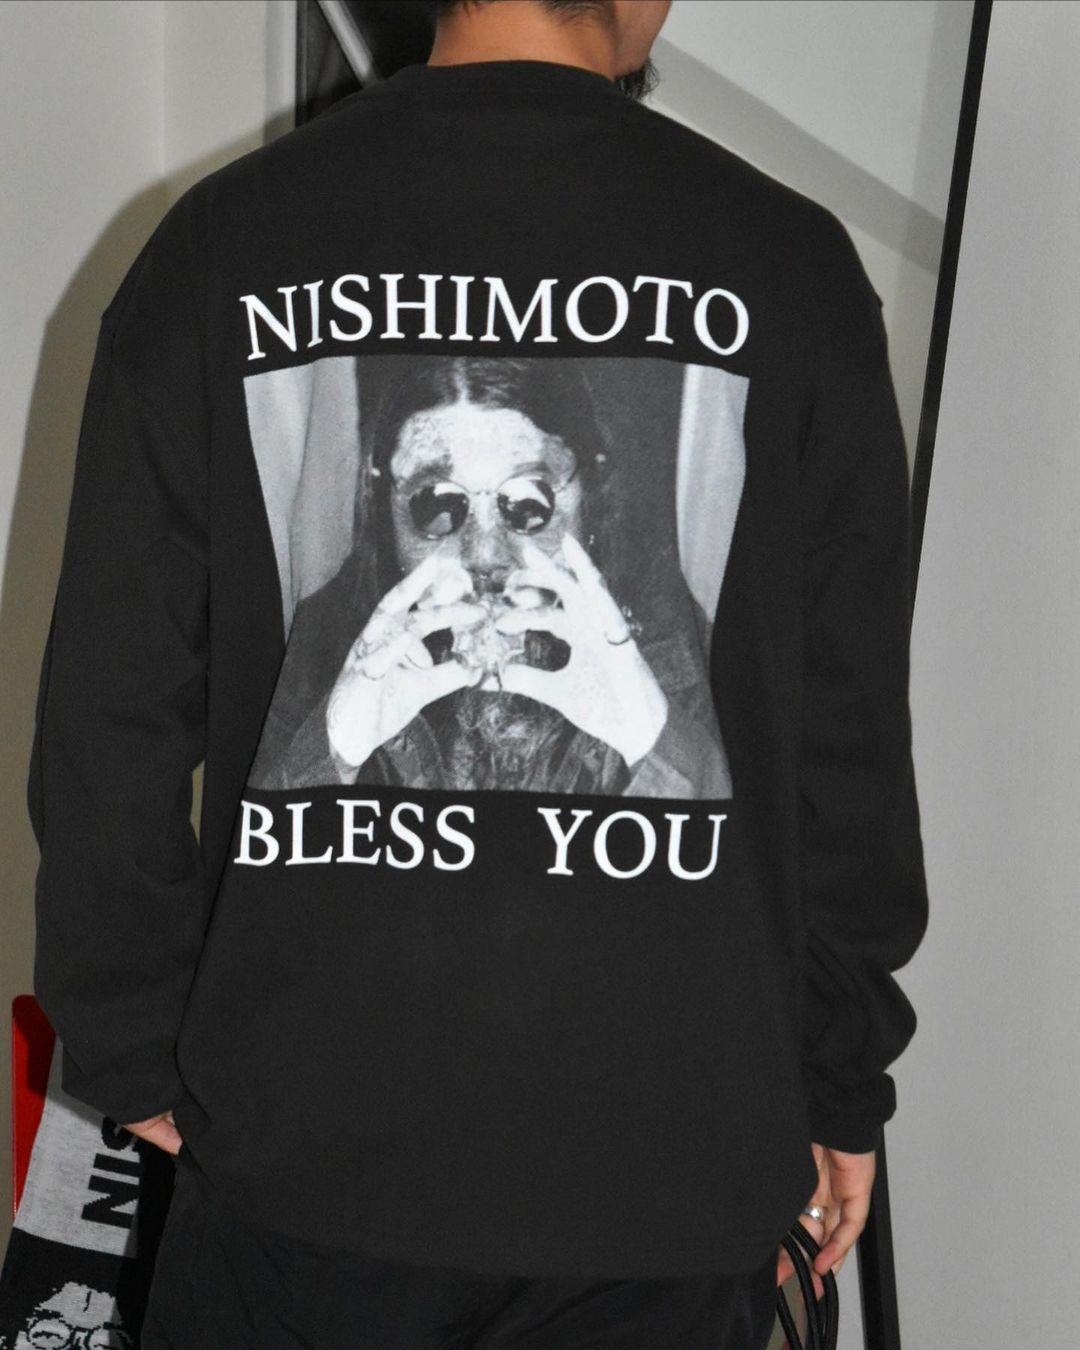 NISHIMOTO IS THE MOUTH / FLOAT L/S TEE